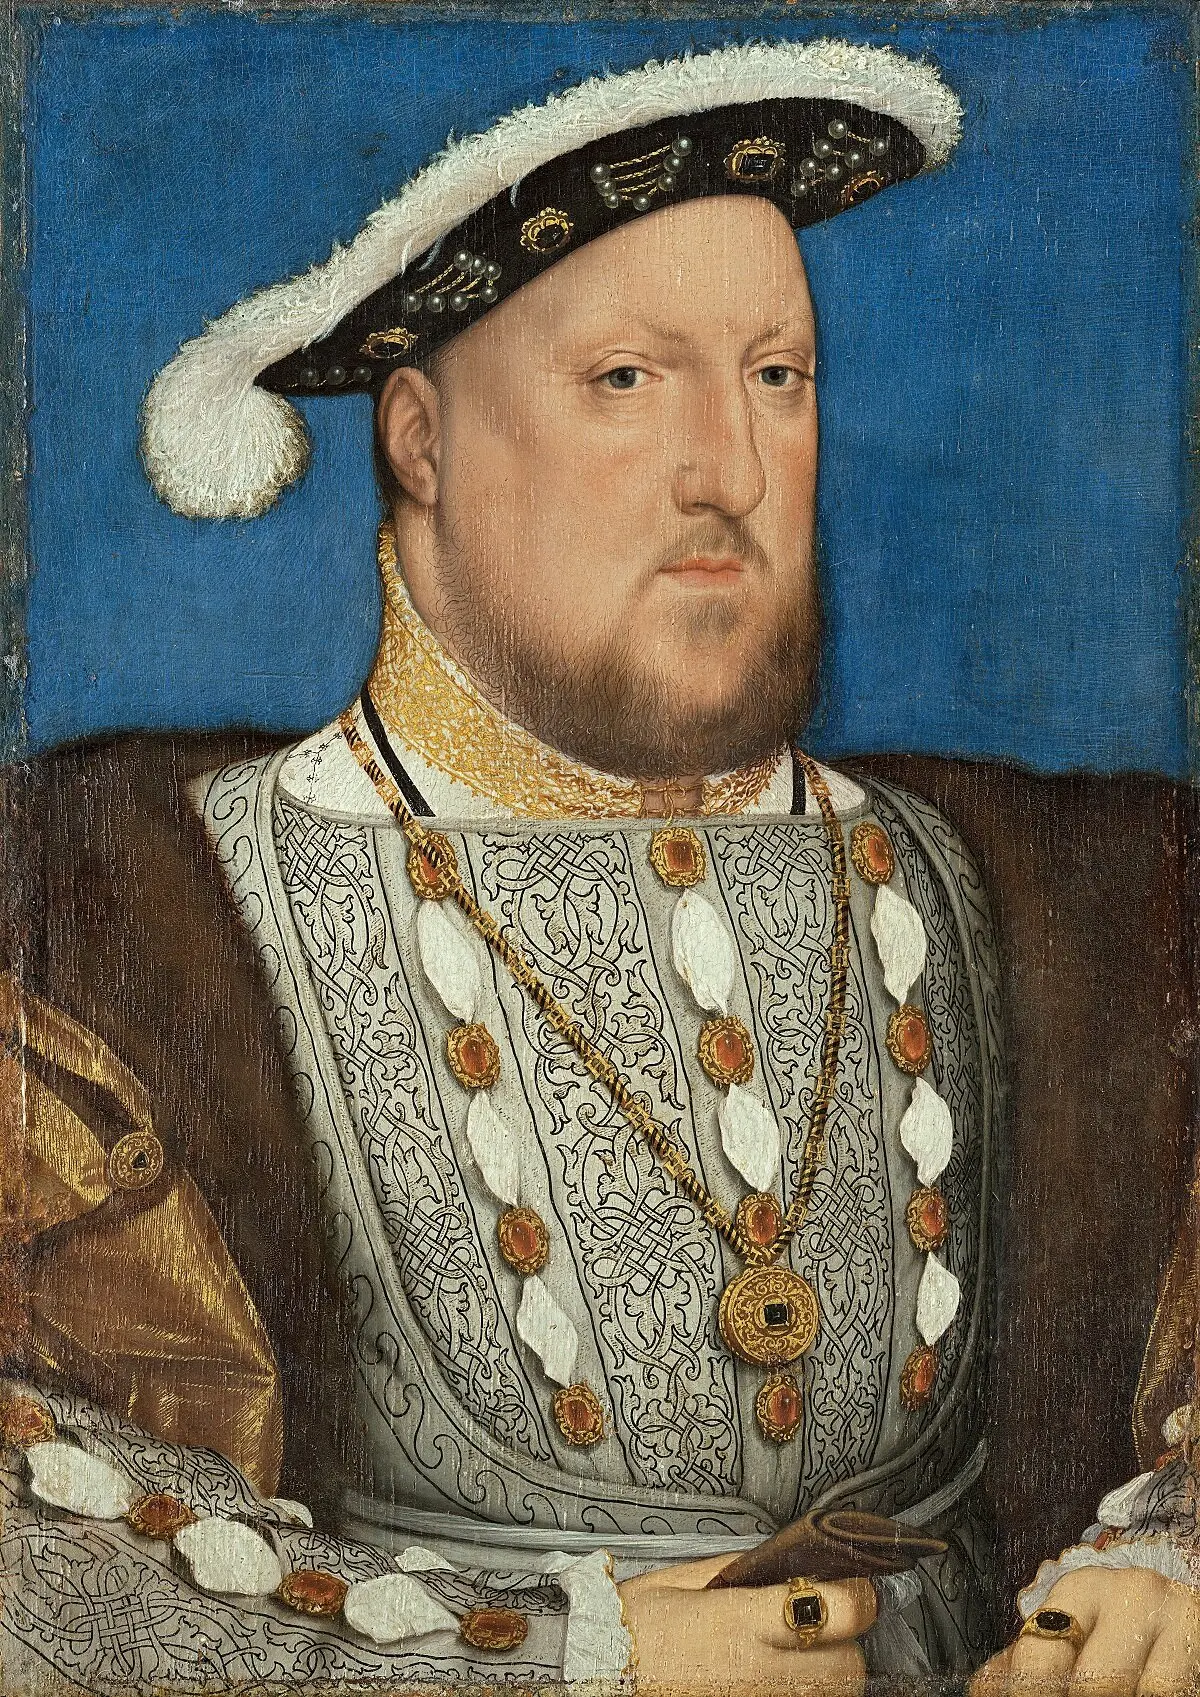 A portrait by Hans Holbein the Younger of Henry VII.